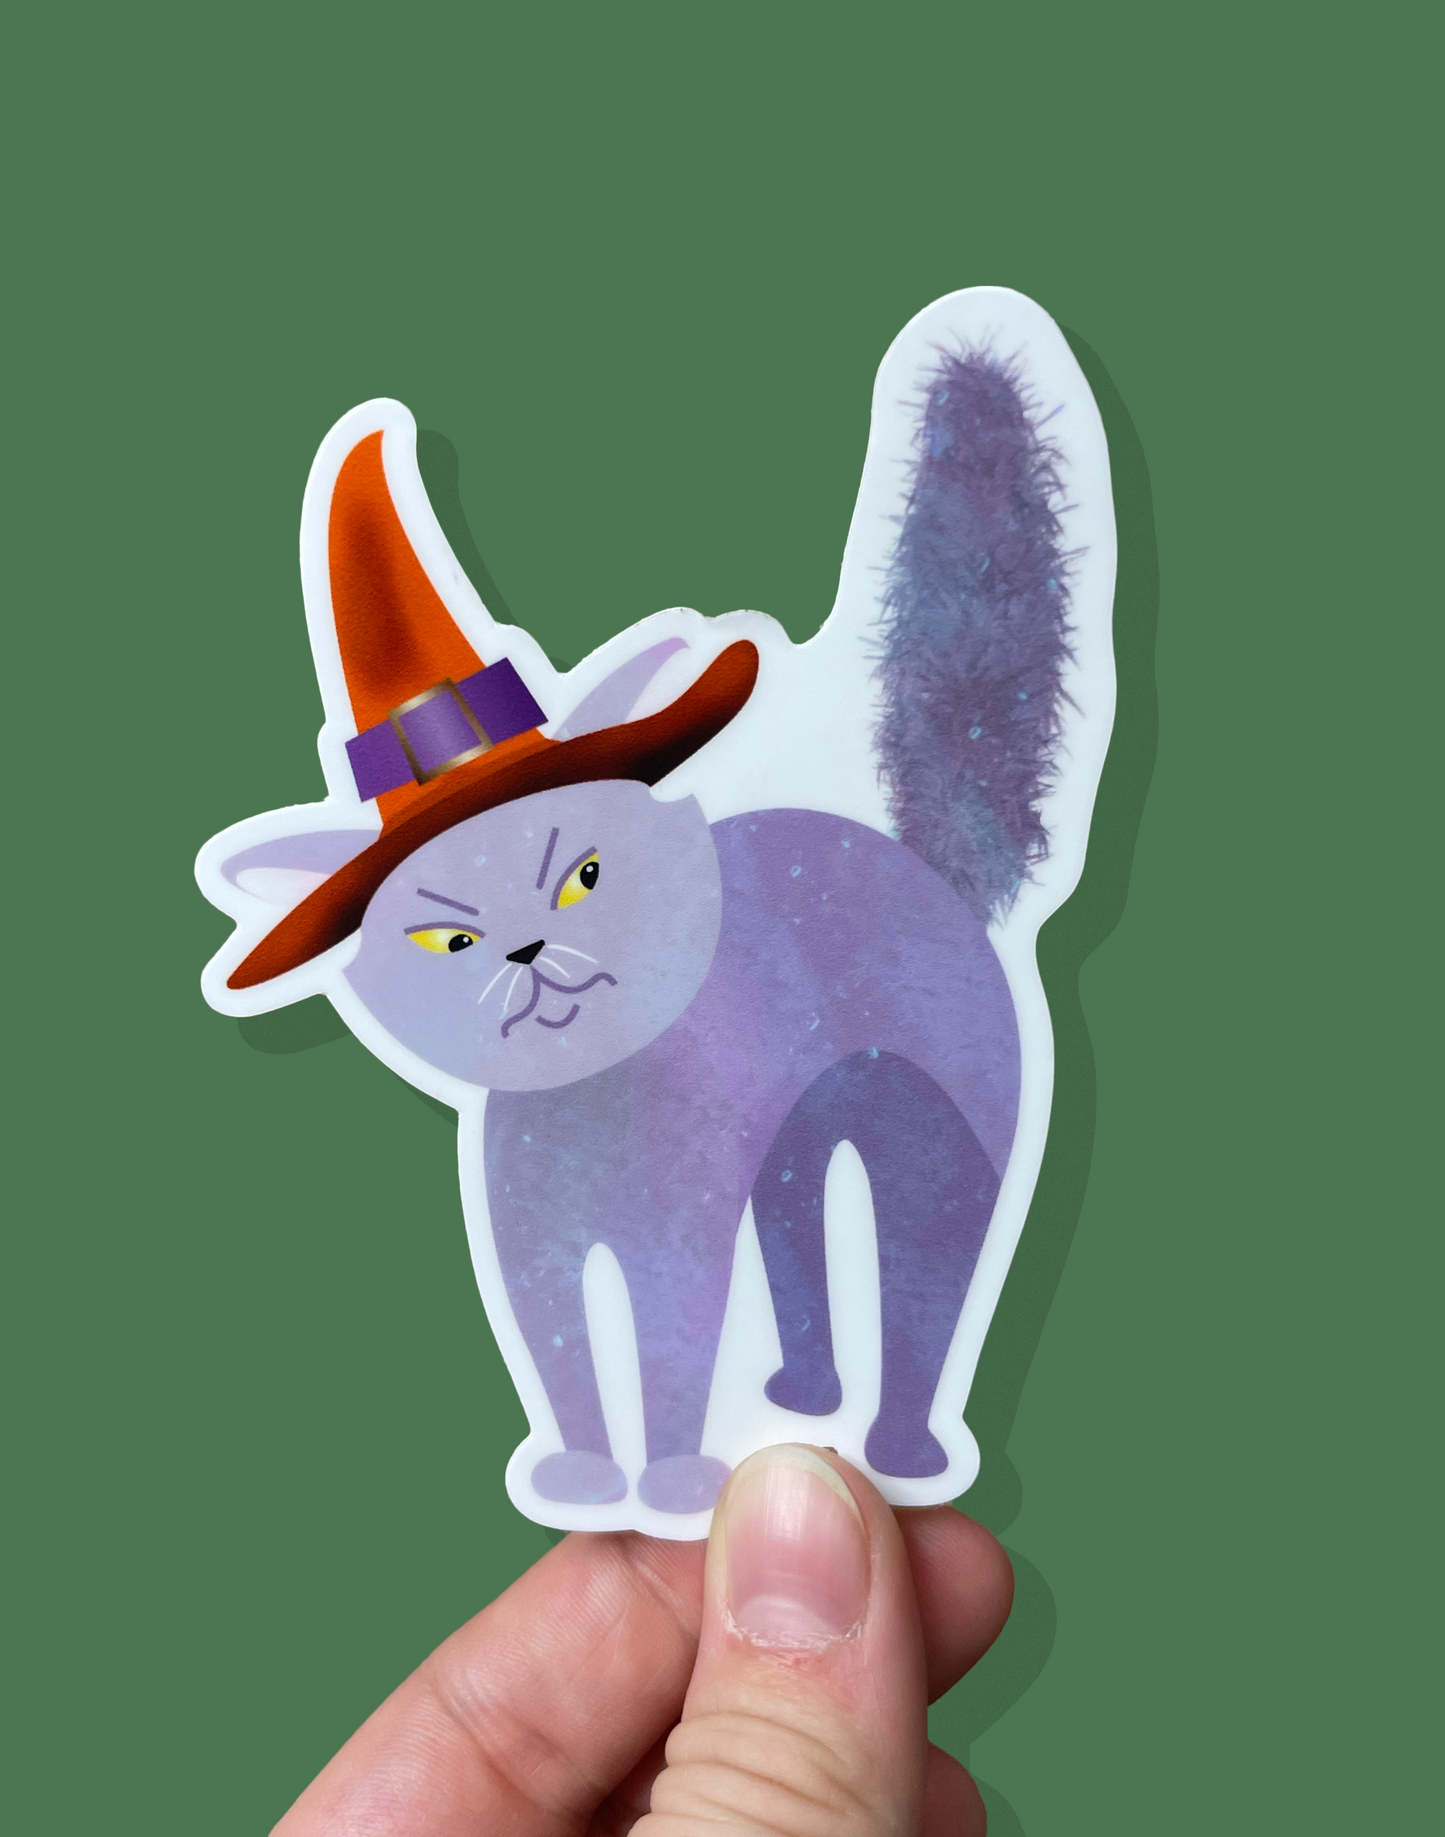 Spooked Halloween Witch Cat Sticker